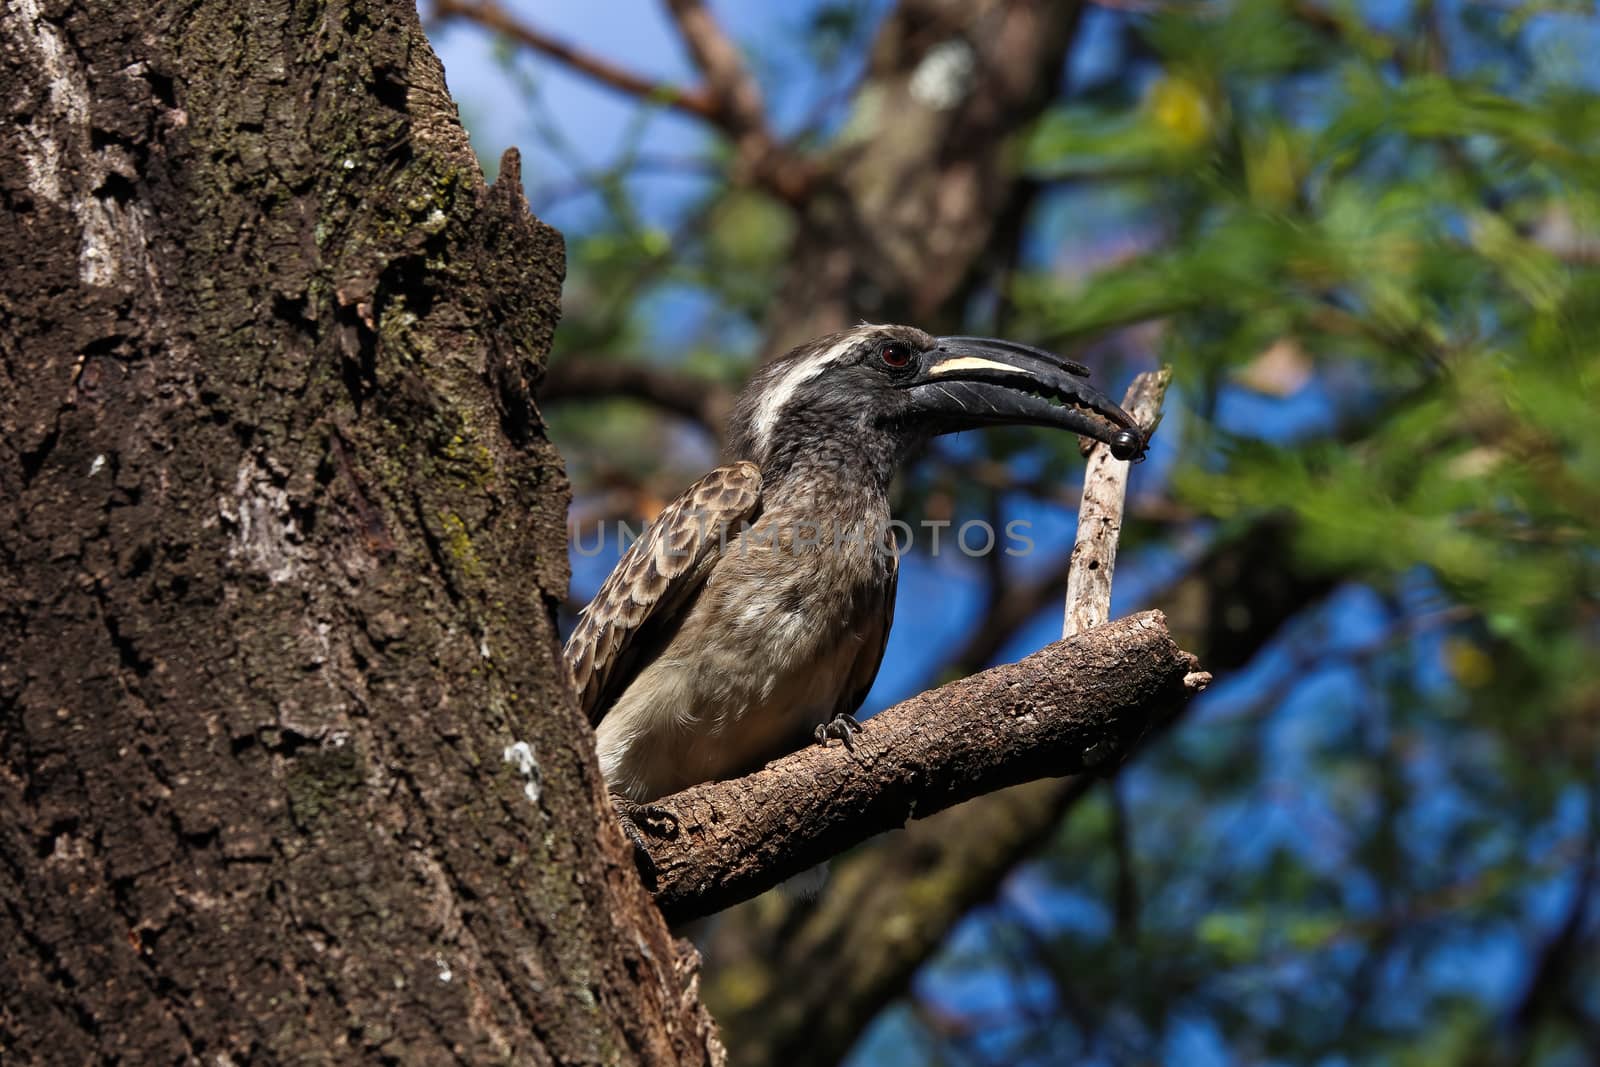 African Grey Hornbill Male With Caught Insect (Lophoceros nasutus) by jjvanginkel